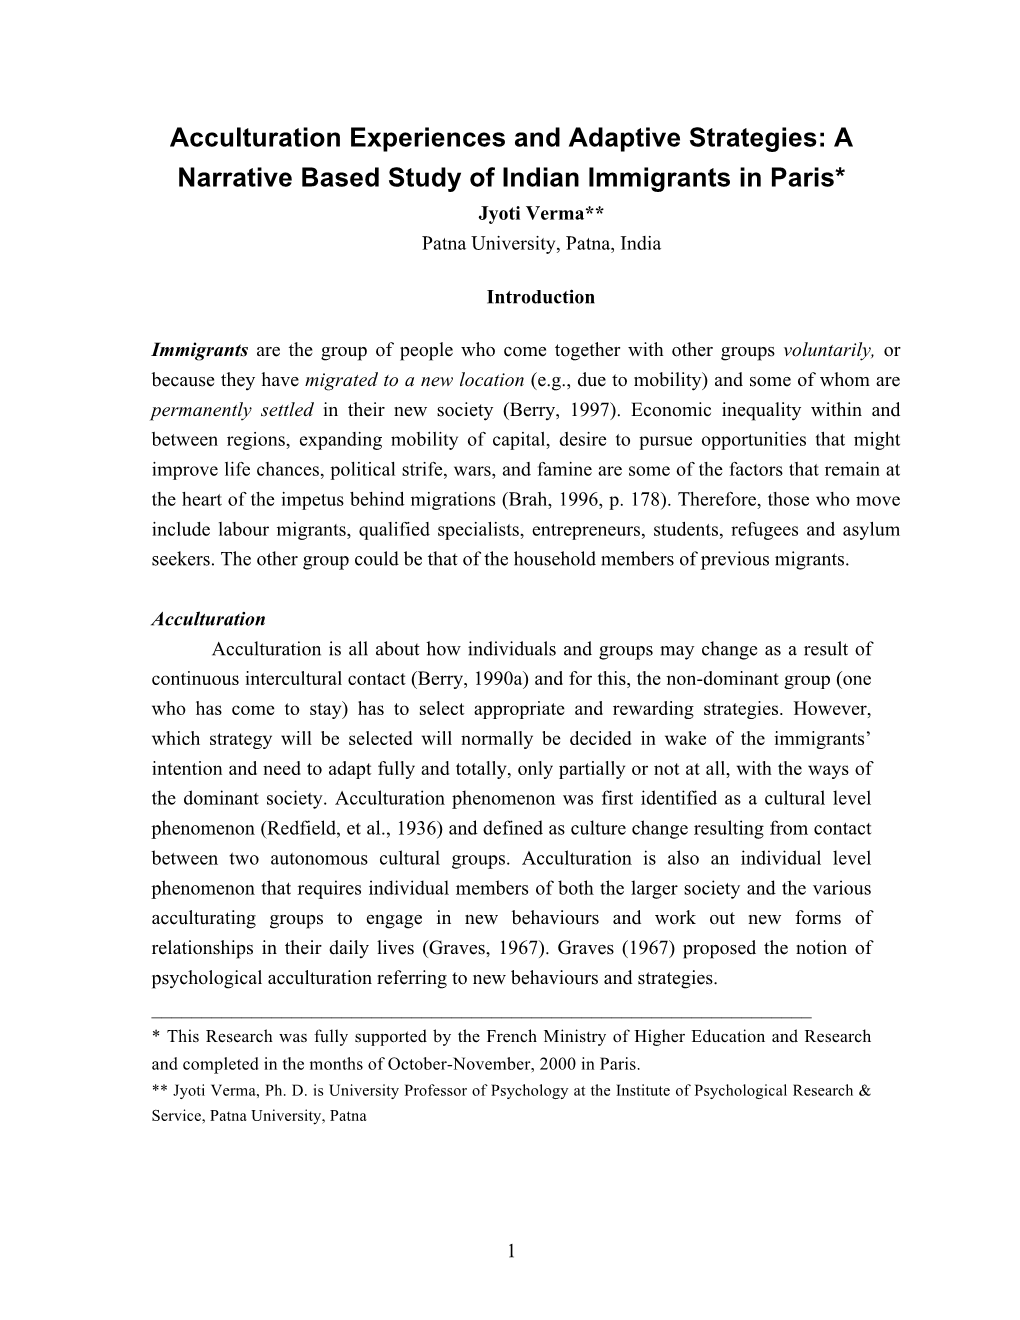 Acculturation Experiences and Adaptive Strategies: a Narrative Based Study of Indian Immigrants in Paris* Jyoti Verma** Patna University, Patna, India